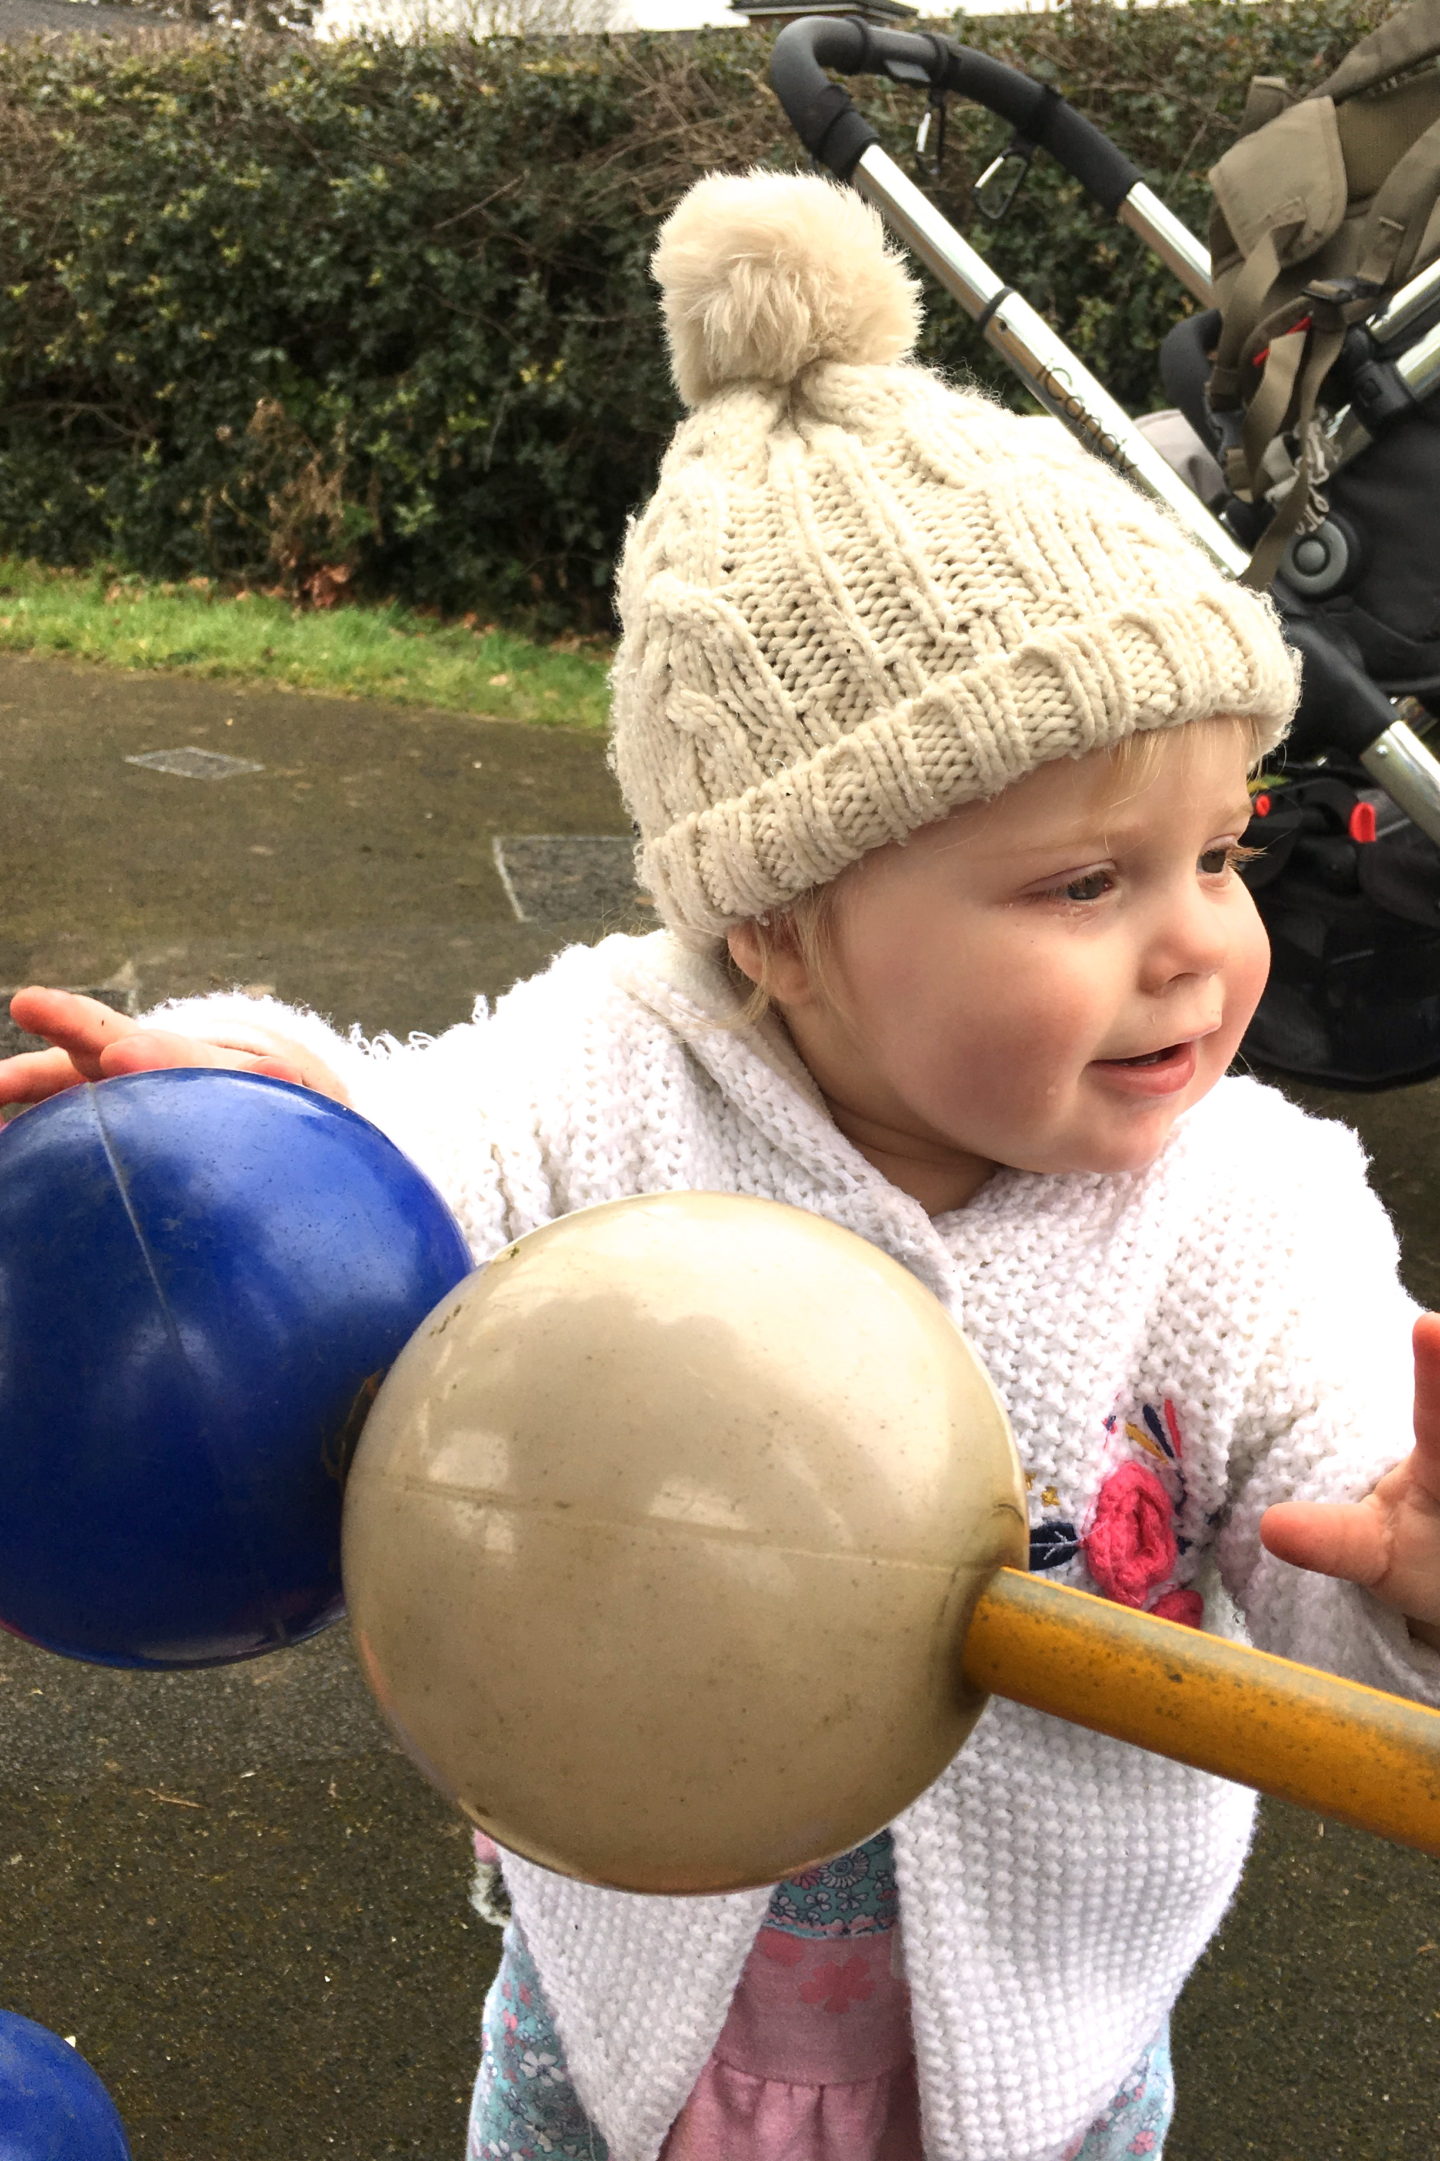 one year old girl in bobble hat, playing with oversized abacus